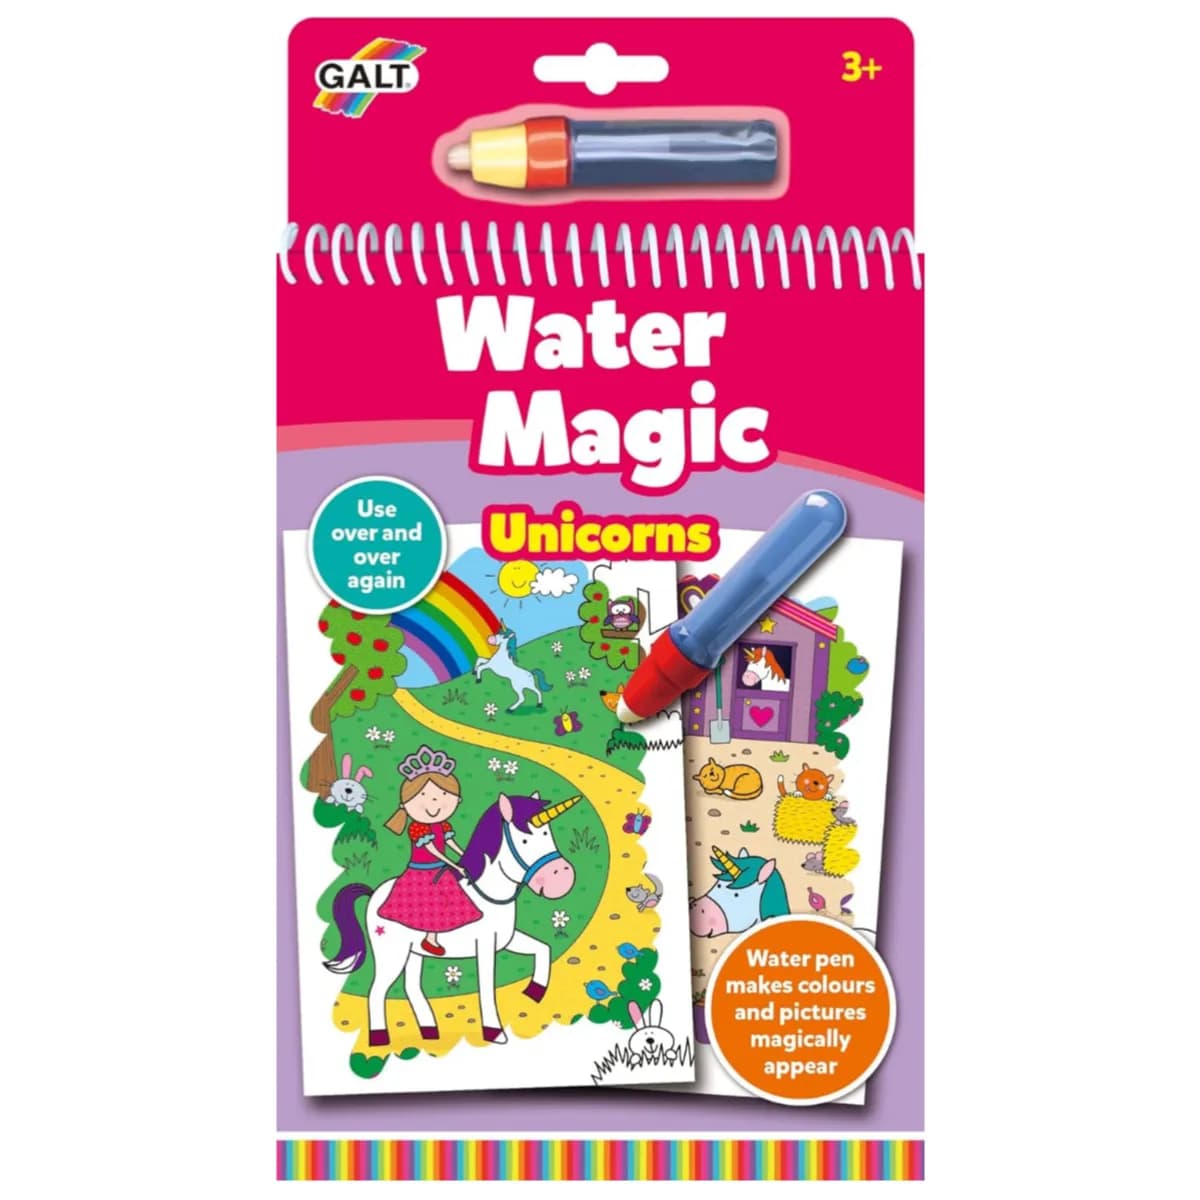 Galt Water Magic - Unicorns Colouring Book With Water Pen For Girls - DWFS86